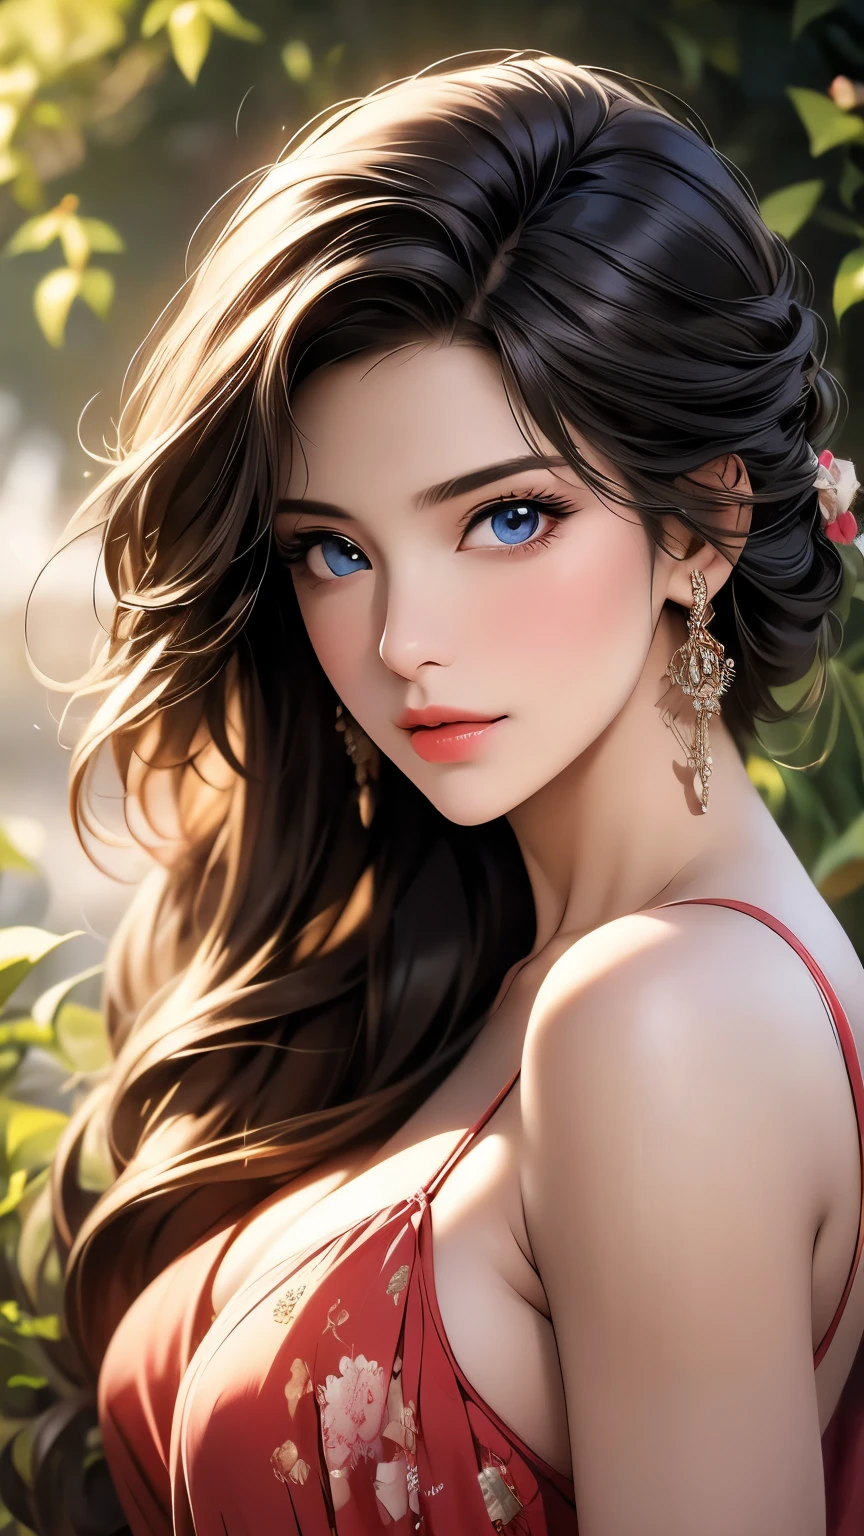 (highest quality,4k,8k,High resolution,masterpiece:1.2),super detailed,(realistic,photorealistic,photo-realistic:1.37),detailed and beautiful eyes,dense and beautiful lips,highly detailed eyes and face,long eyelashes,[garden, Bright colors,soft natural light,romantic atmosphere,vivid flowers, flowing dress,feminine and elegant pose,Happy and confident look, High fashion style, Dreamy scenery, fine art portrait, art print quality, oil painting techniques, impressionist style.smiling with his mouth closed